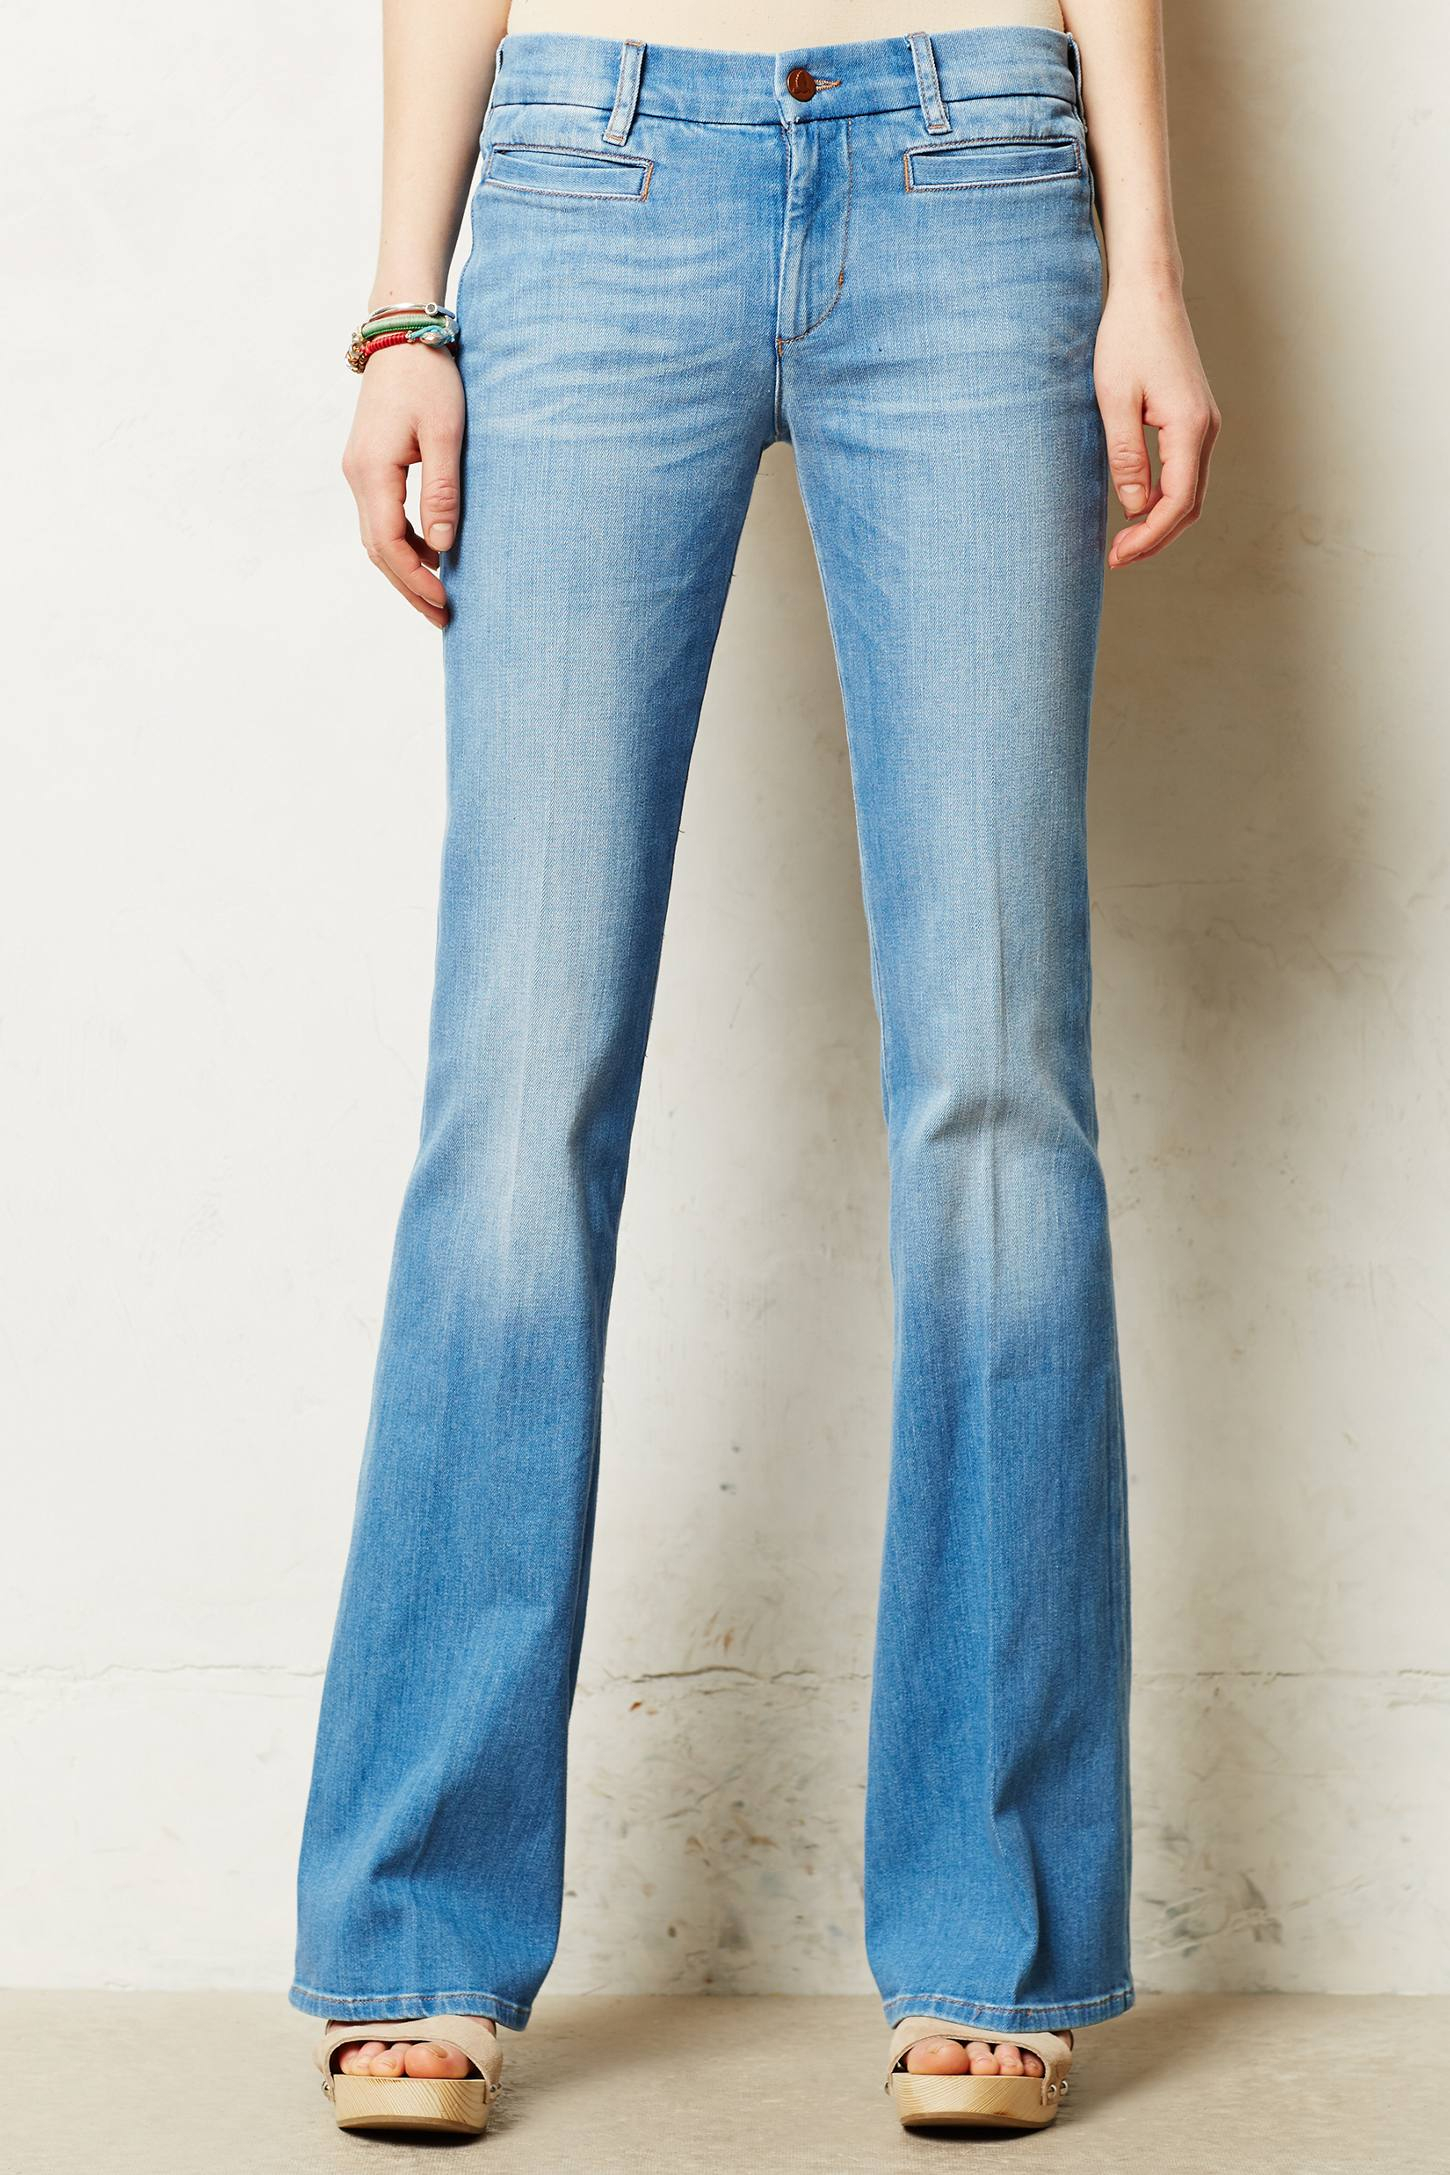 Mih Jeans Marrakesh Flare Jeans in Blue (Dreaming Blue) | Lyst